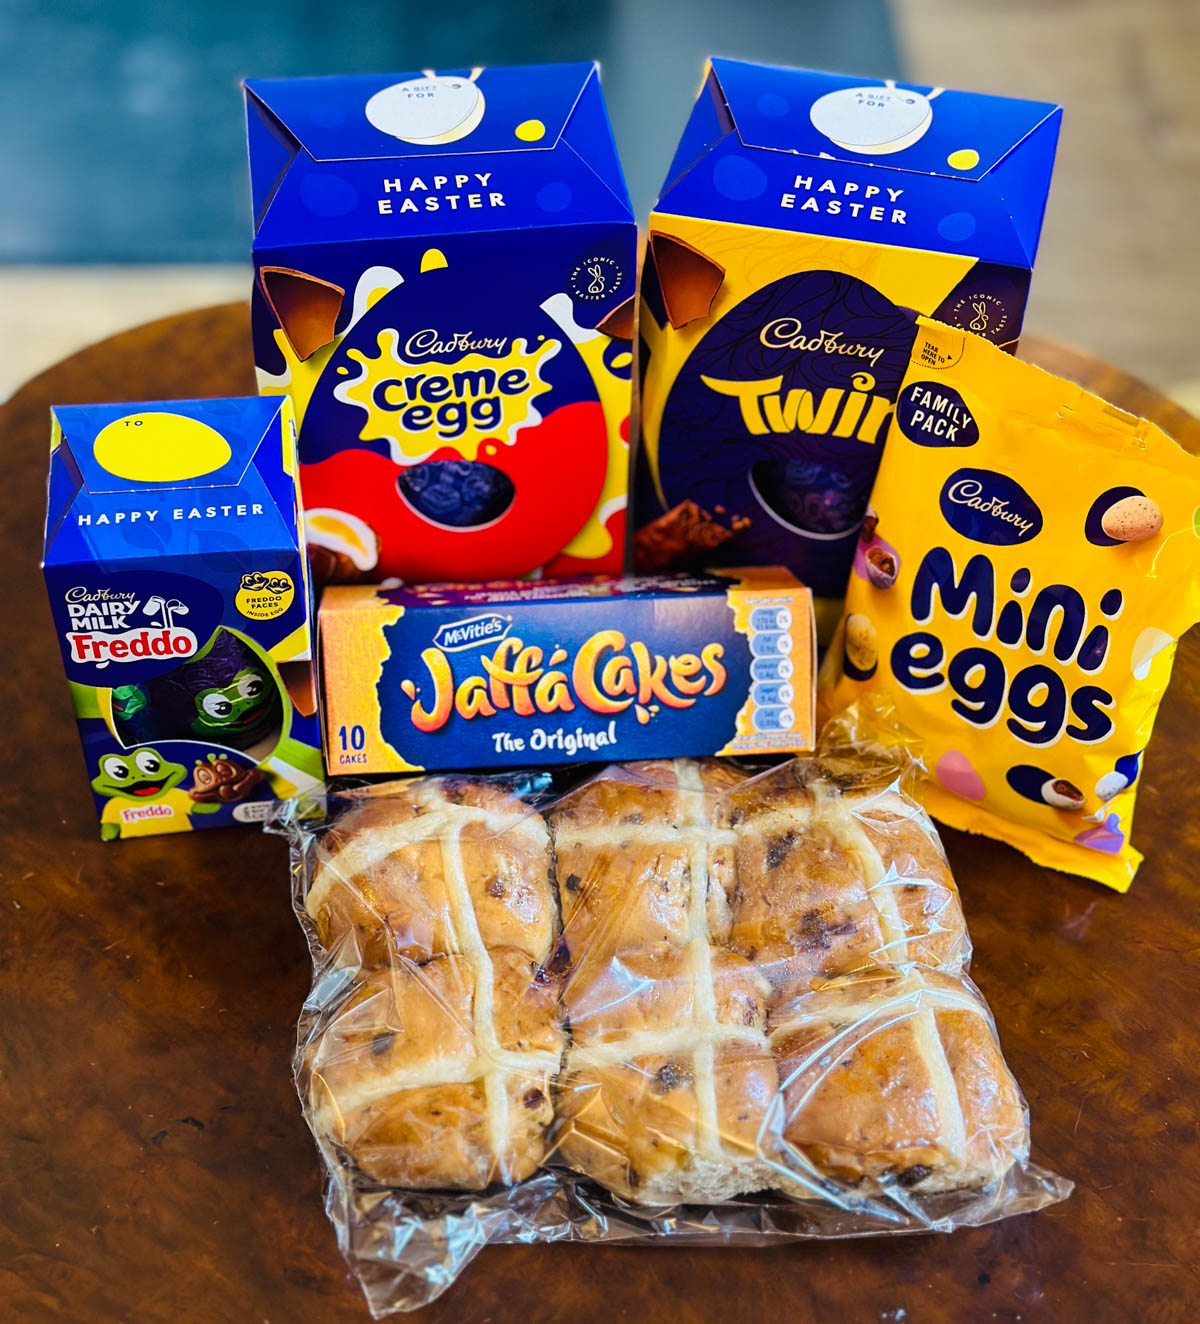 The Cadbury Easter candies sit on a table next to a package of hot cross buns.